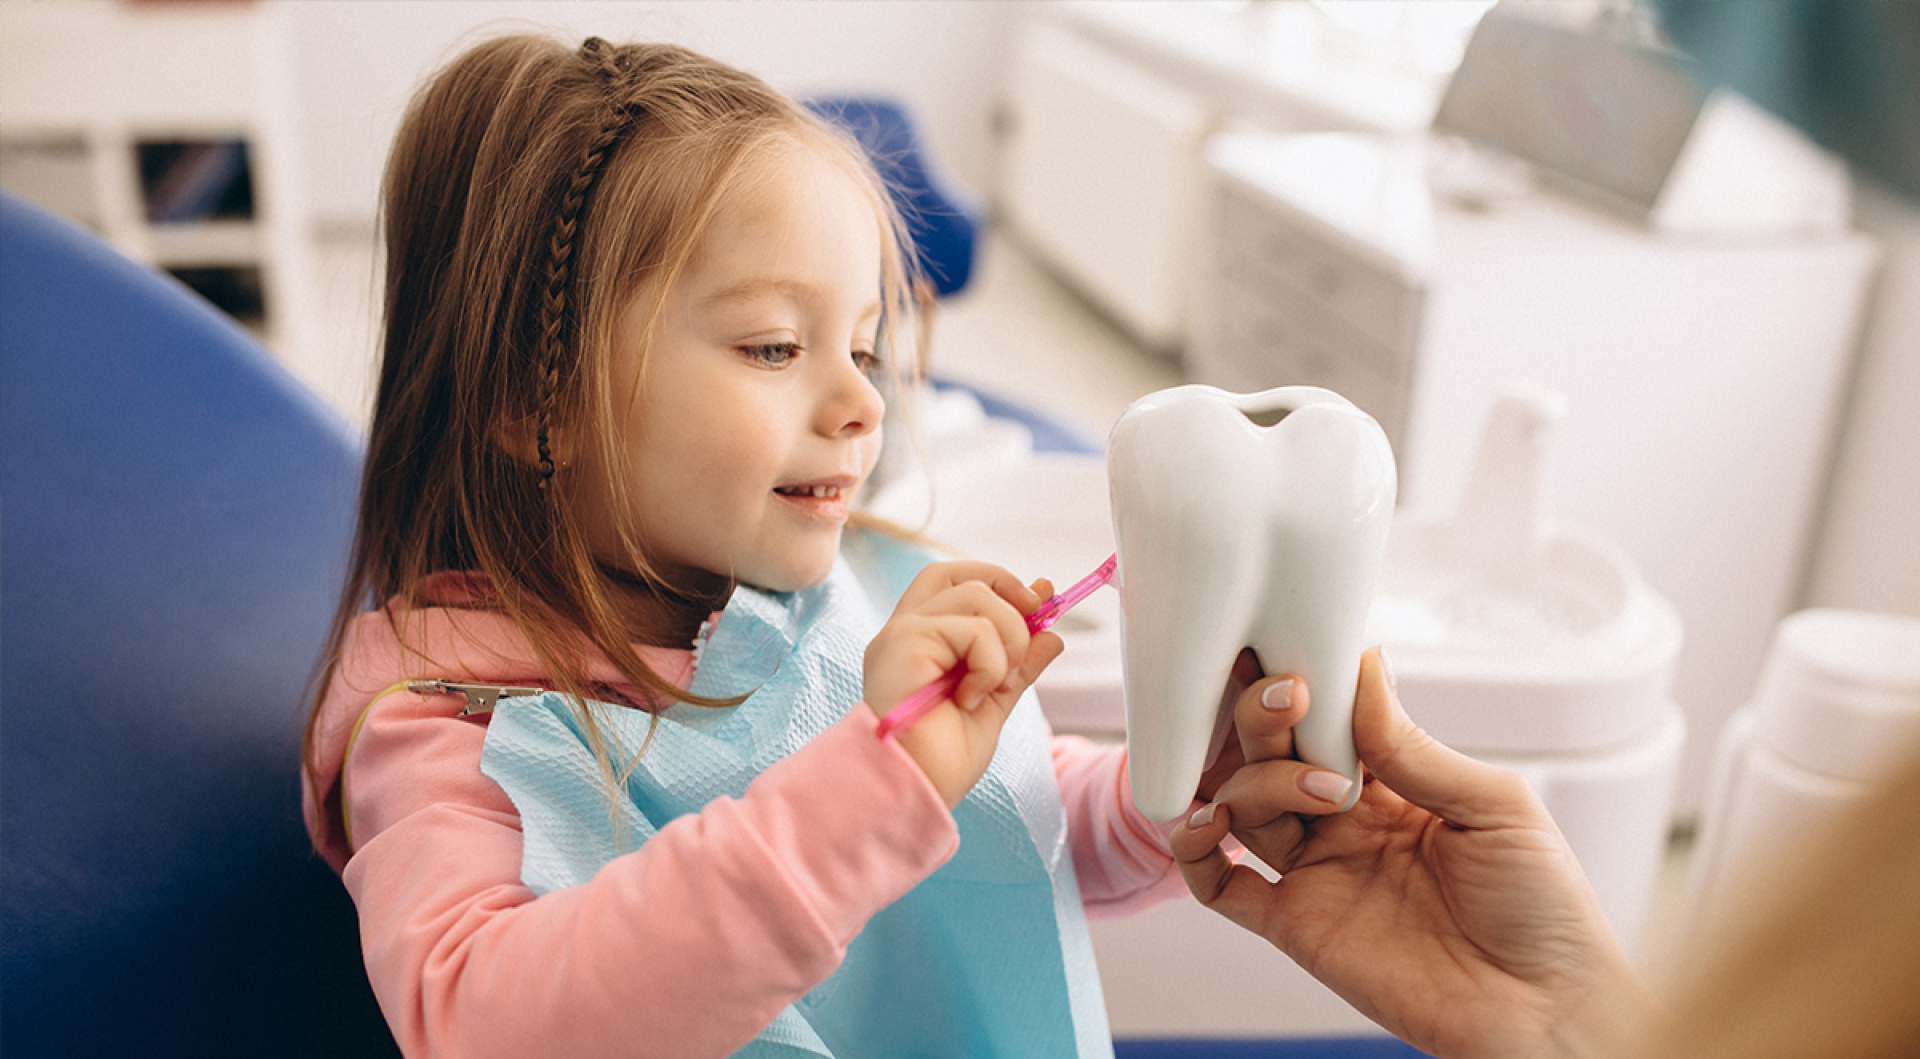 When Should My Child Visit the Dentist?